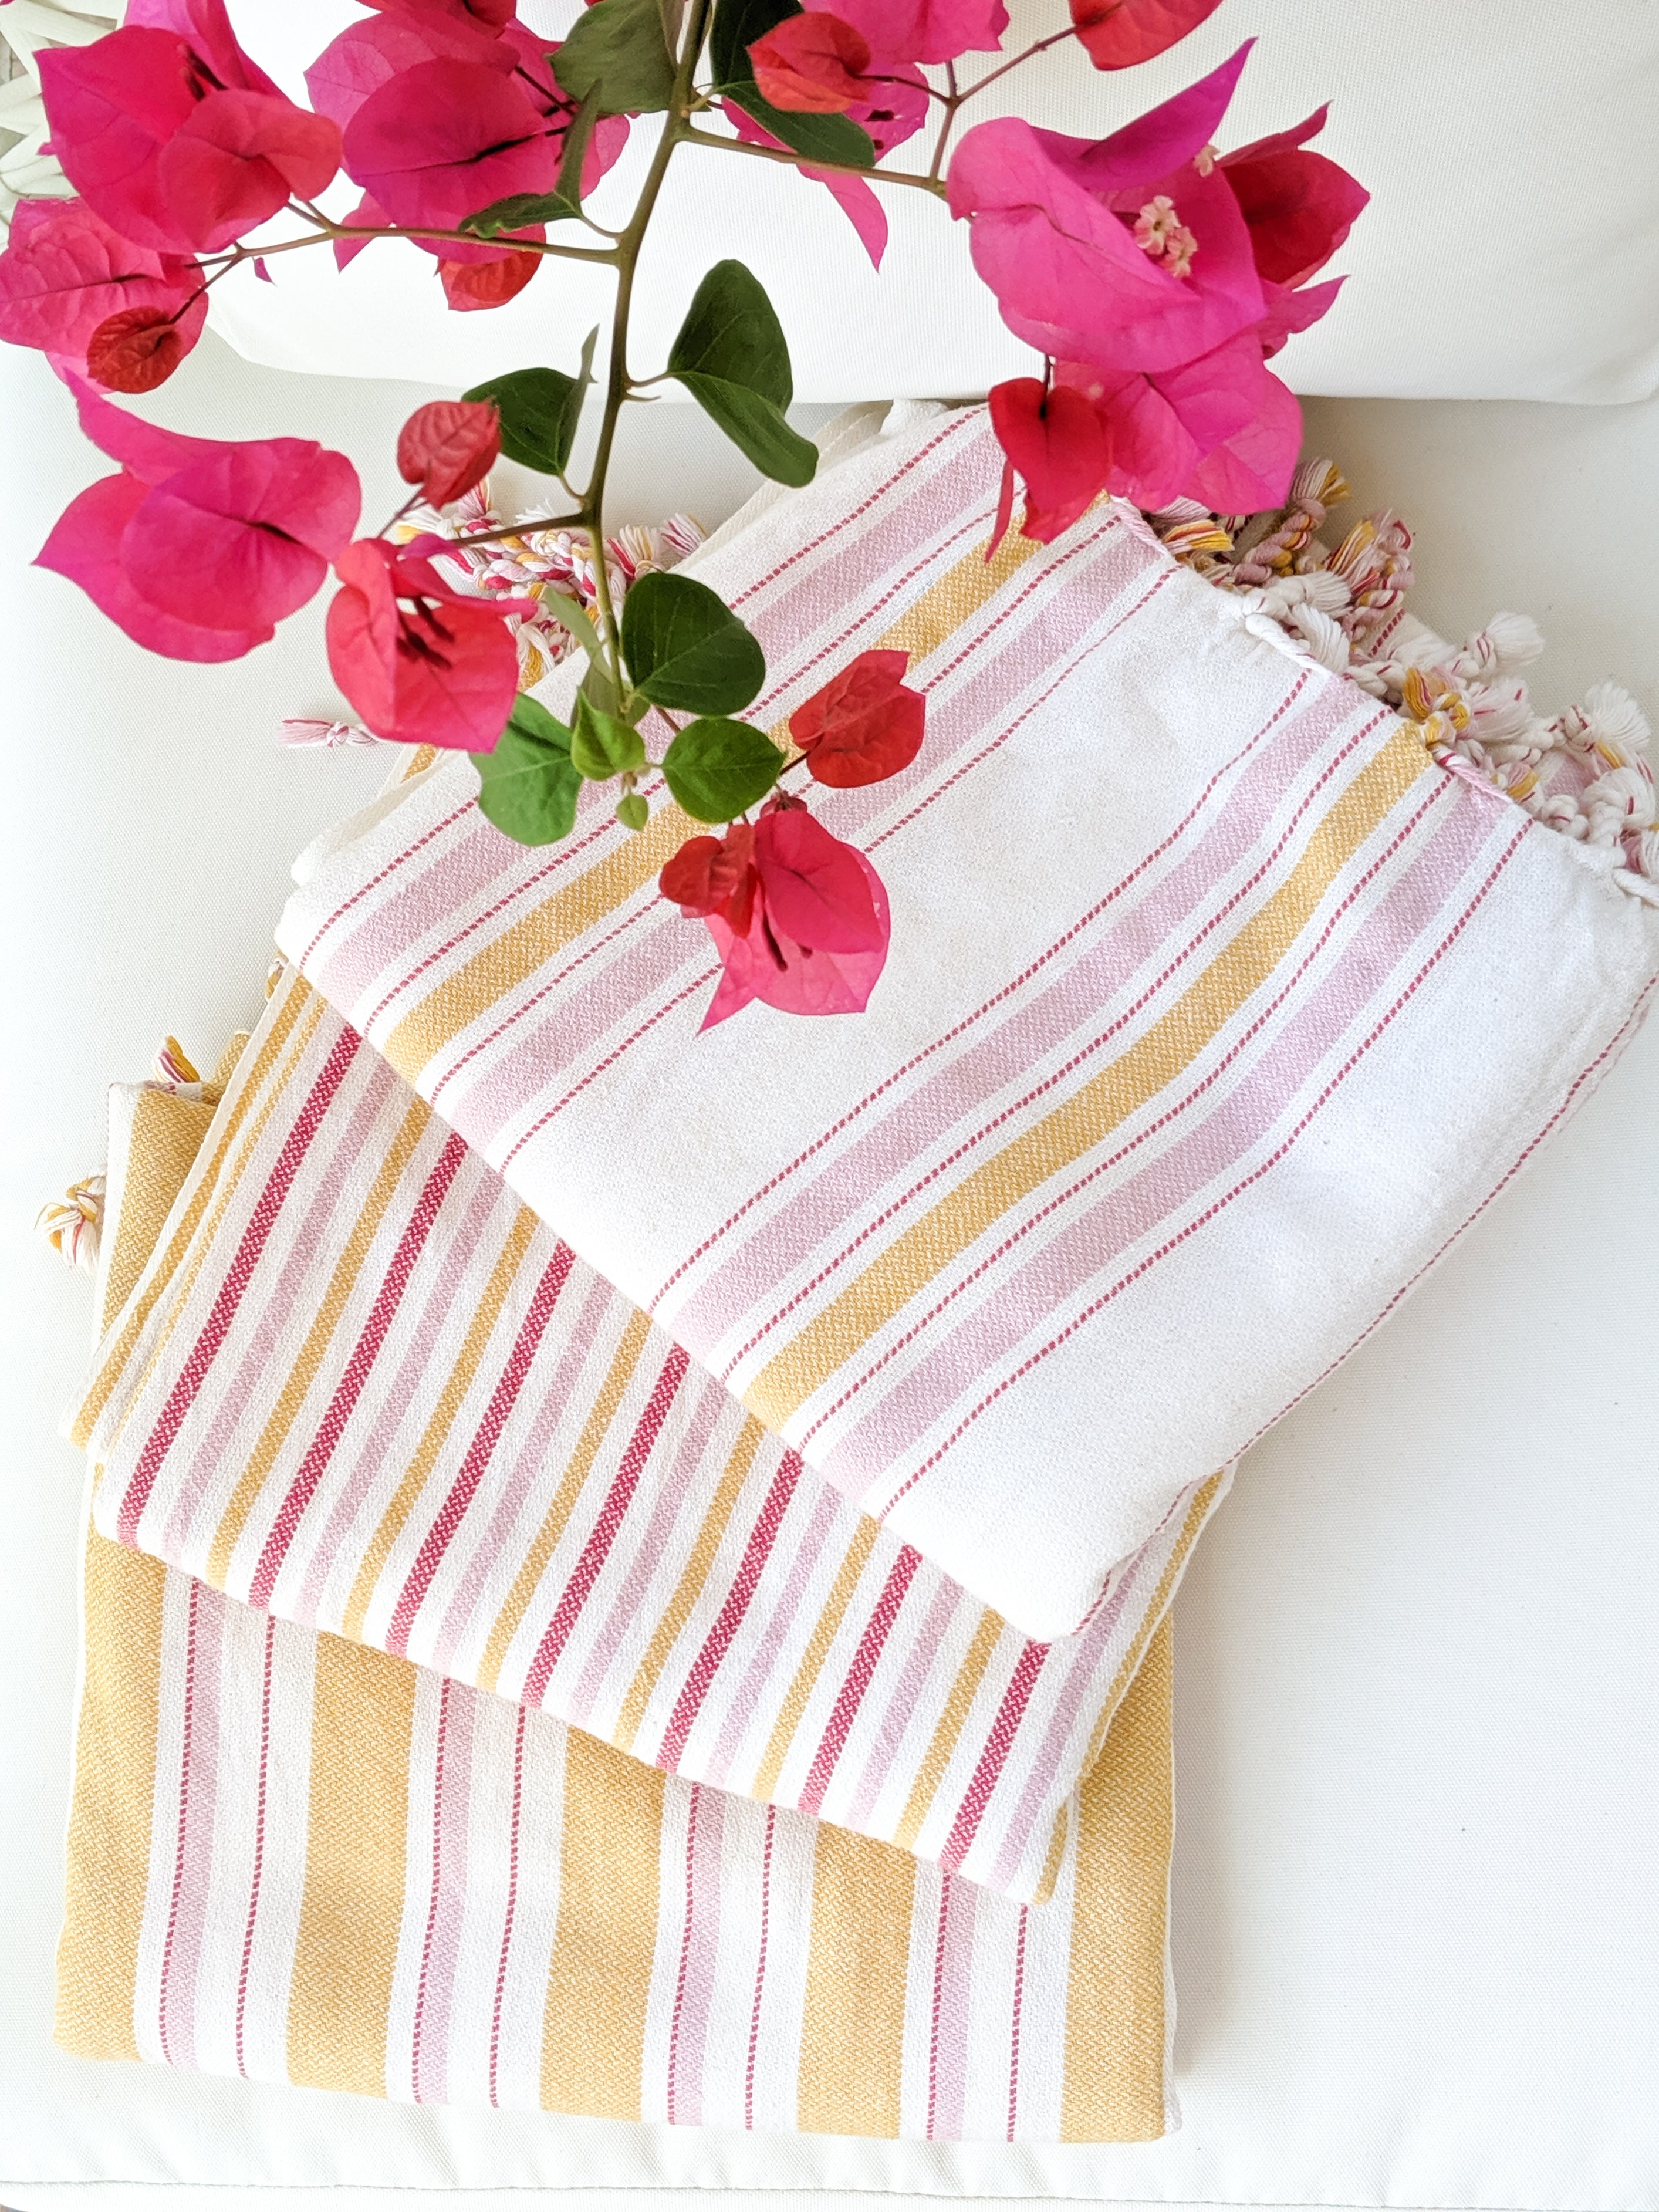 The pros and cons of Turkish towels